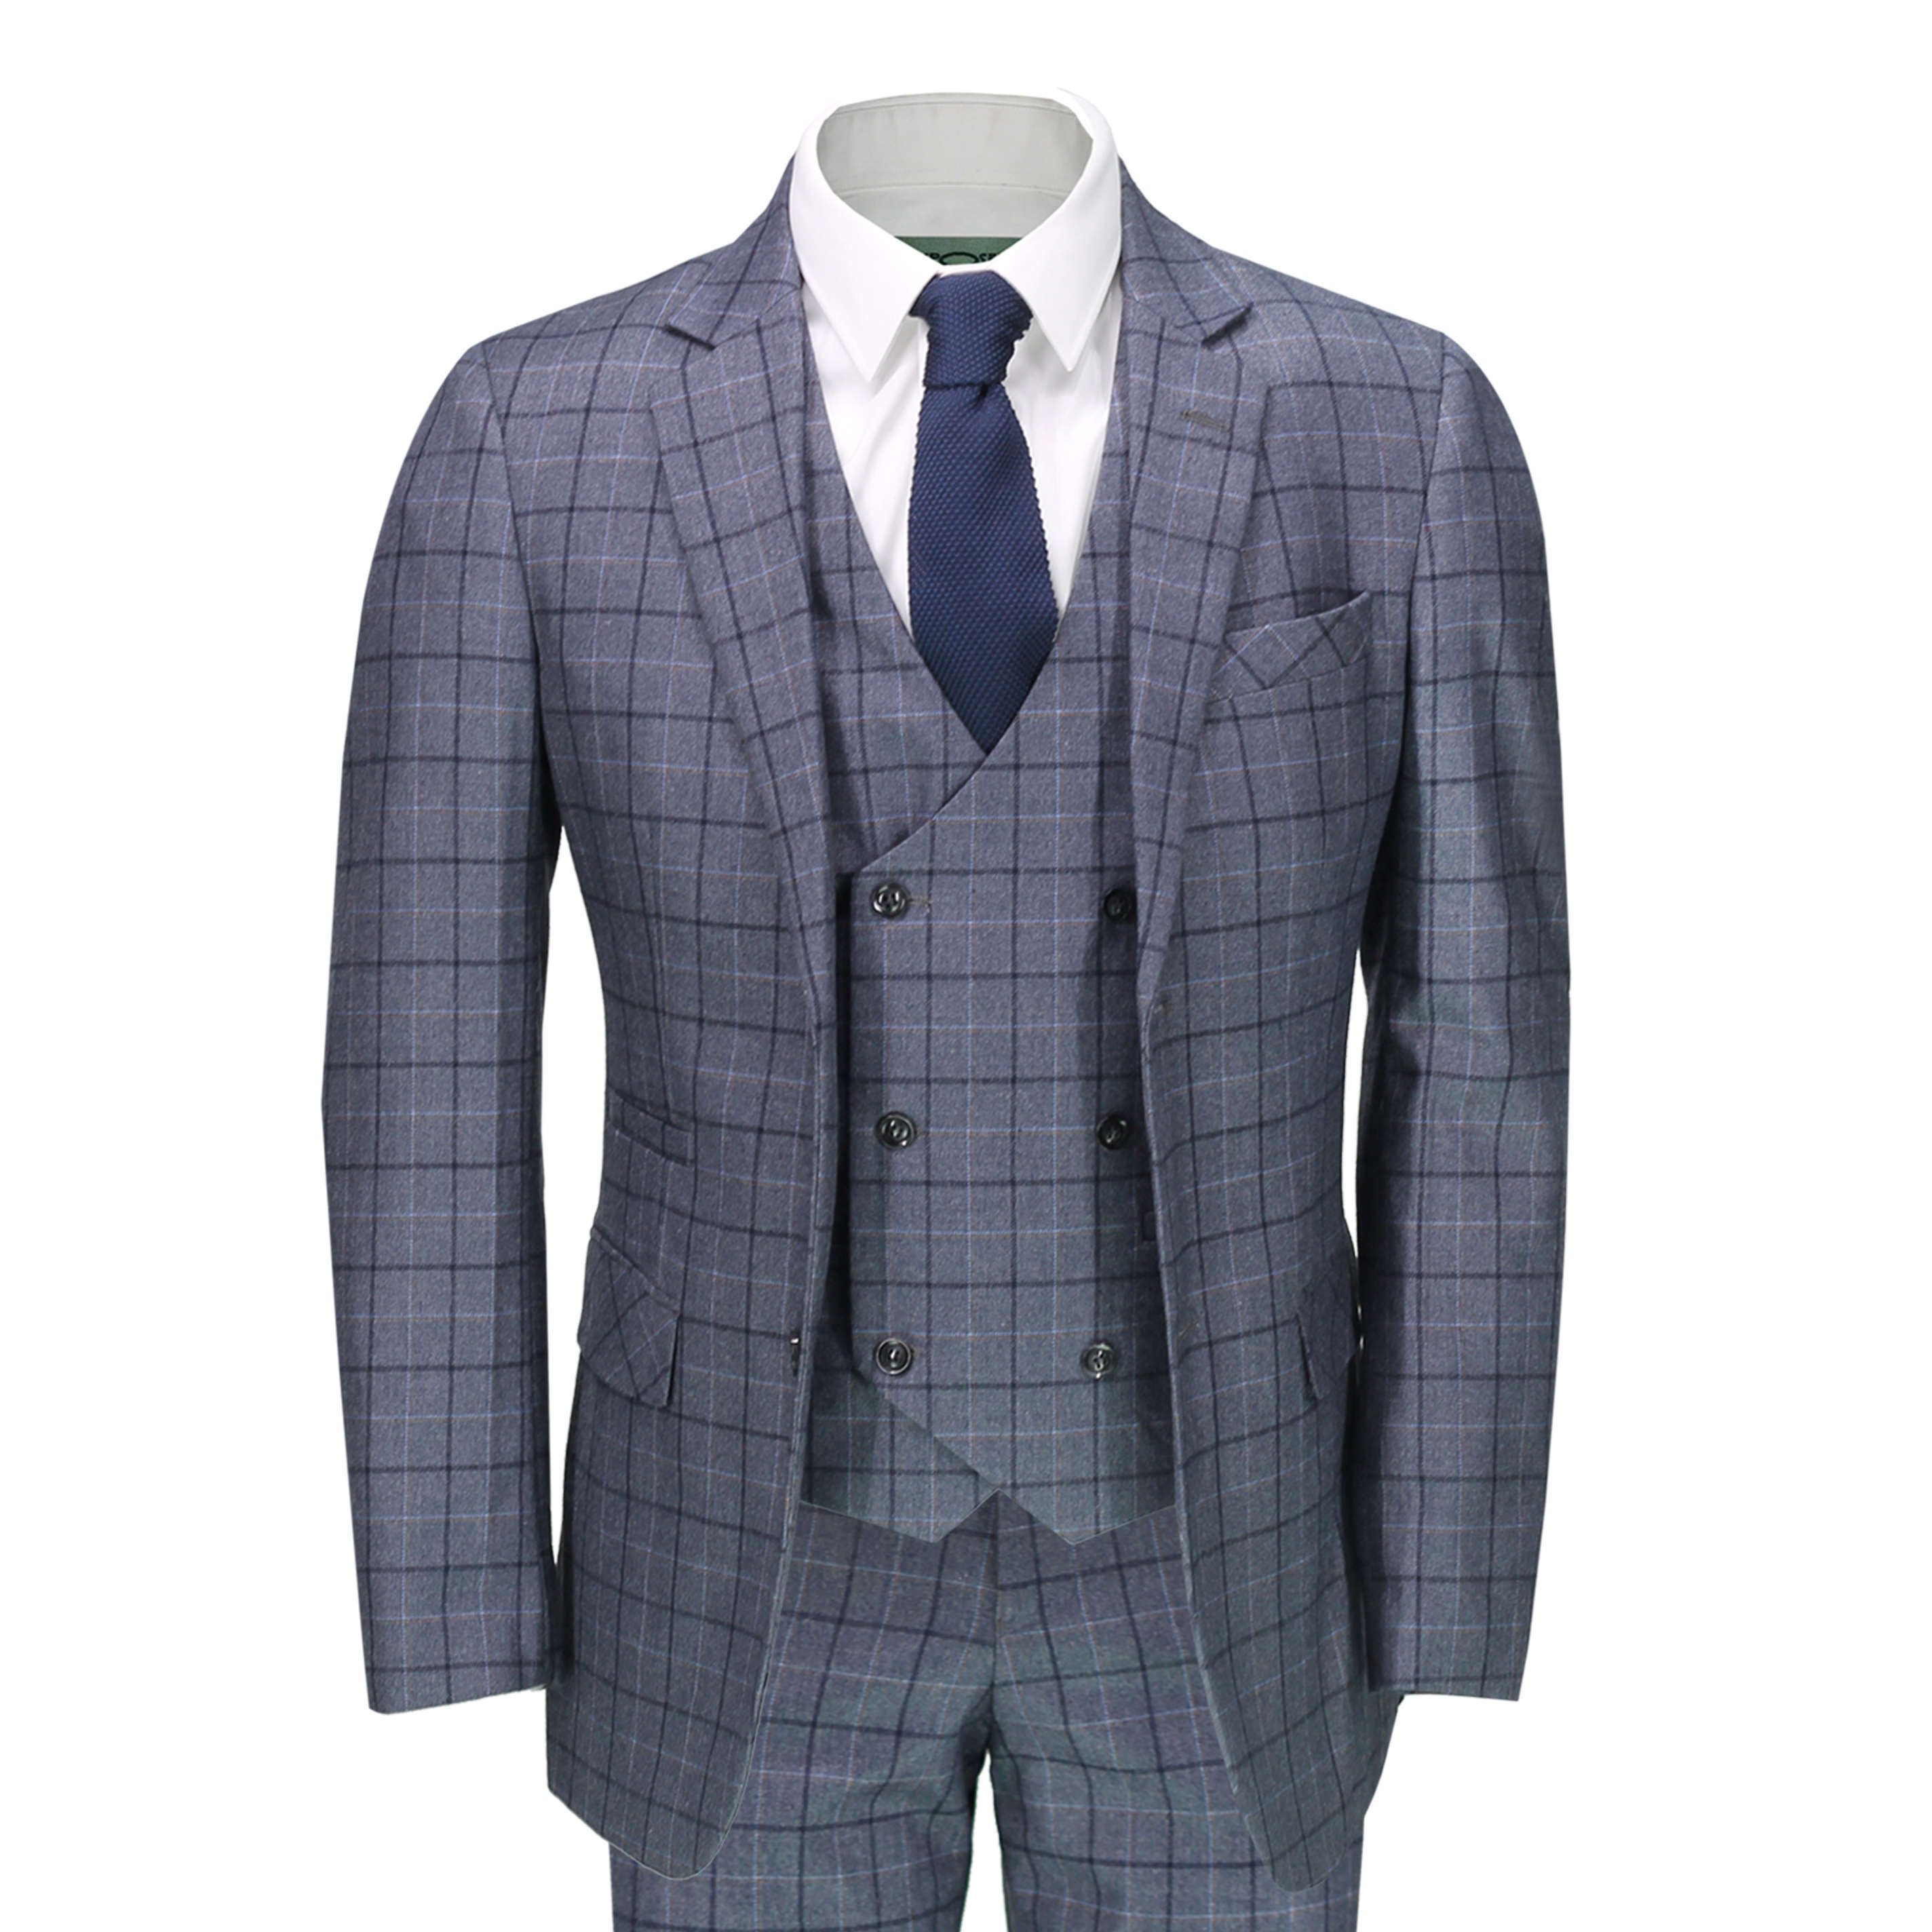 Mens Classic Grey Blue Prince of Wales Checks 3 Piece Double Breasted Suit Smart Retro Tailored Fit